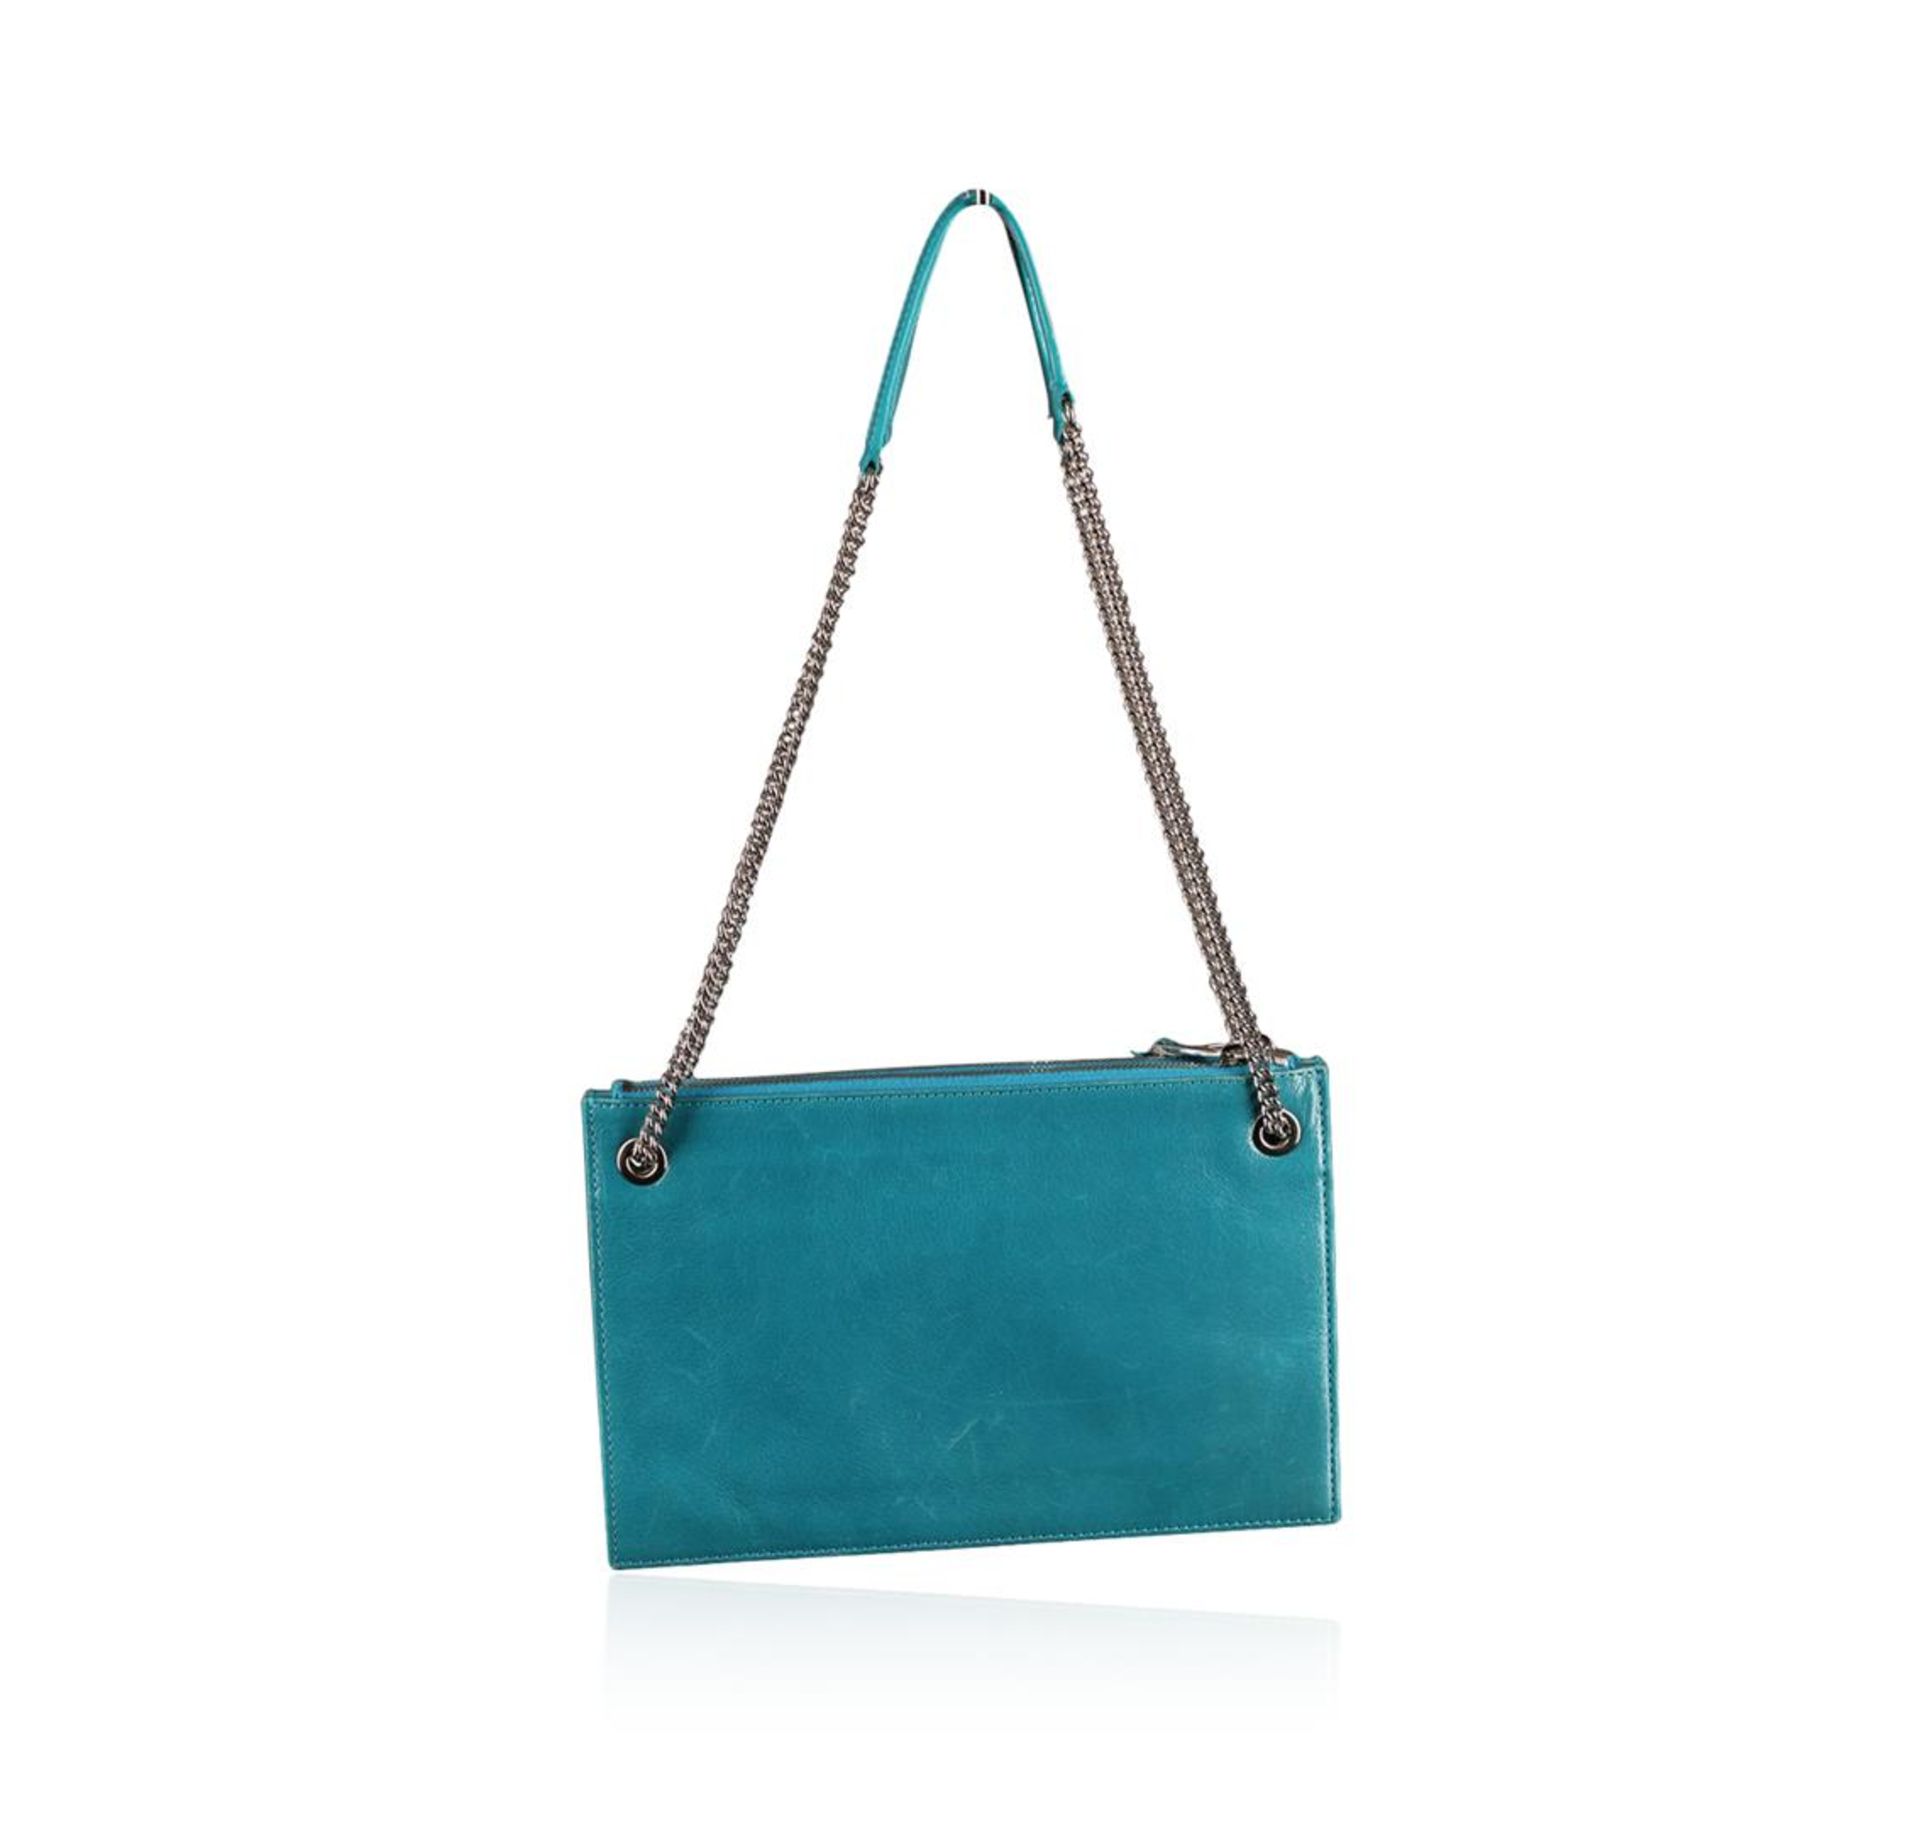 Designer Marc Jacobs Turquoise The Doll Bag - Image 2 of 2